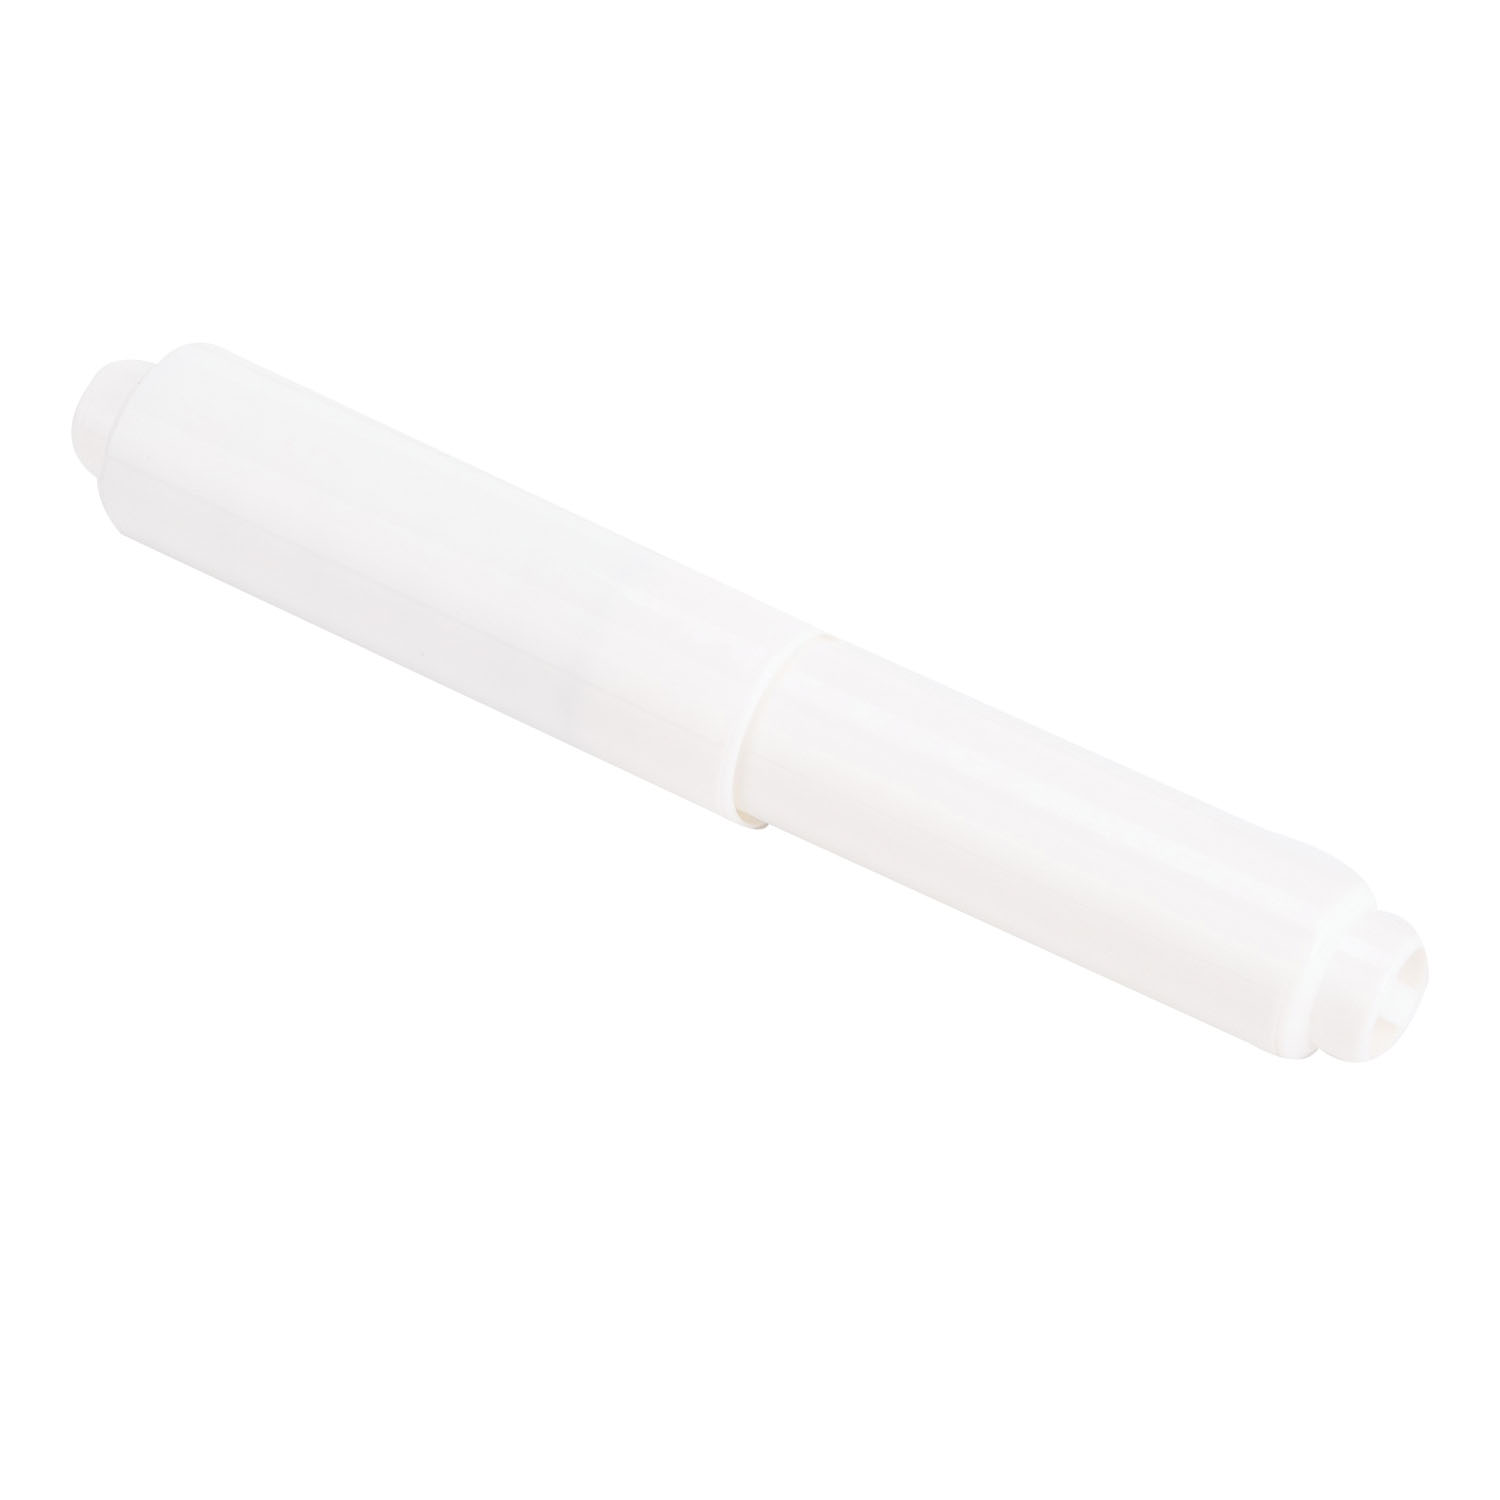 Boston Harbor LBE02002-51-07 Paper Roller, Plastic, Wall Mounting